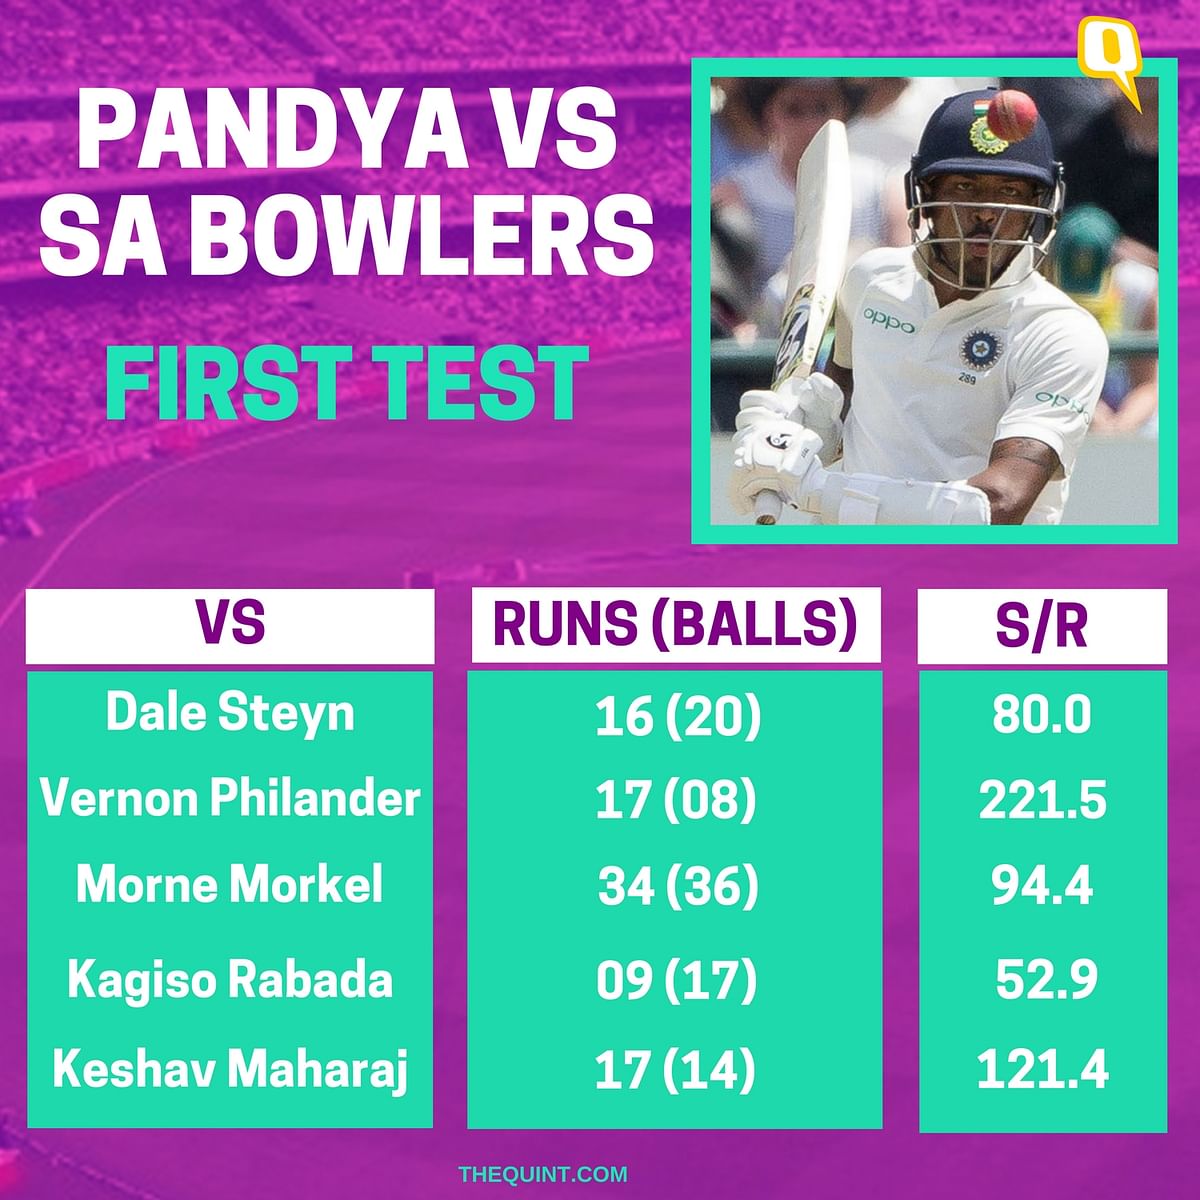 Hardik Pandya scored 93 runs off 95 balls on Day 2 of the first Test between India and South Africa in Cape Town.